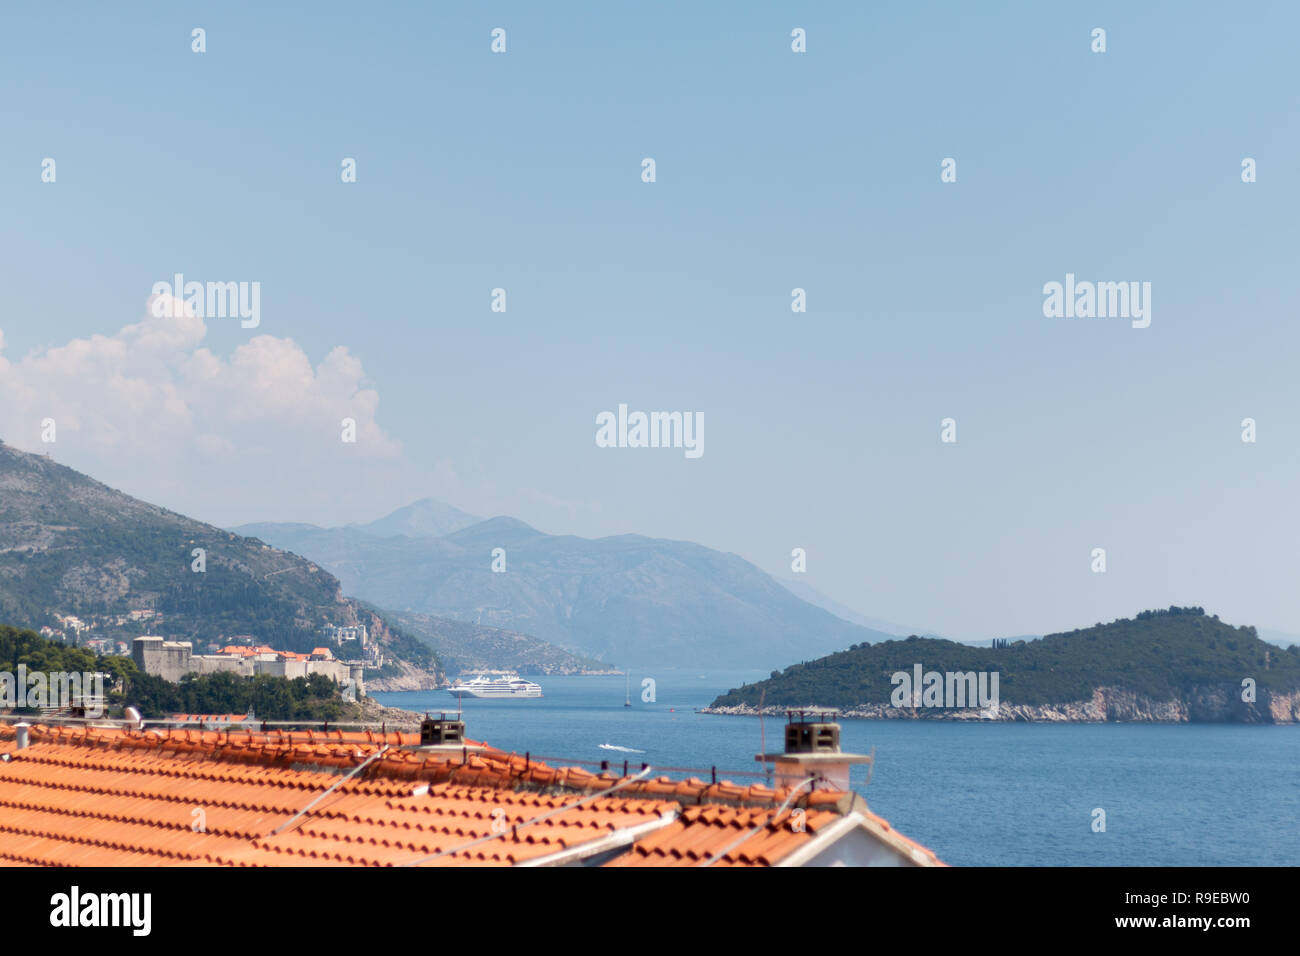 view across the rooftops to Lokrum Island, off mainland Dubrovnik ...